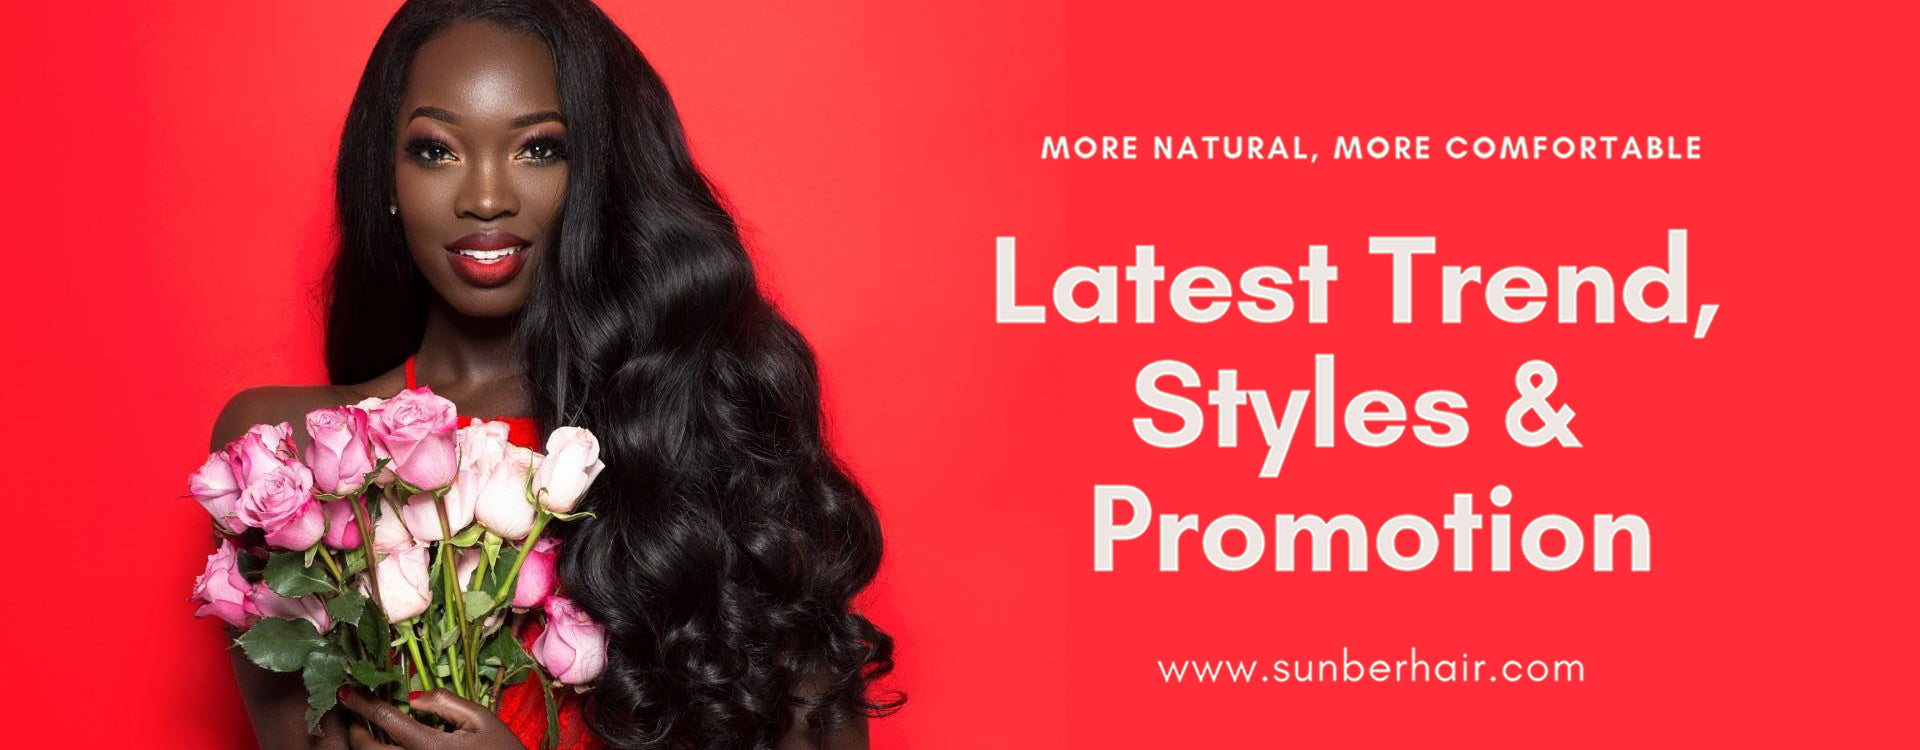 Sunber Hair Indian Body Wave 3 Bundles with 13*4 Ear to Ear Full Lace Frontal Closure, 8A Hotsale Virgin Hair